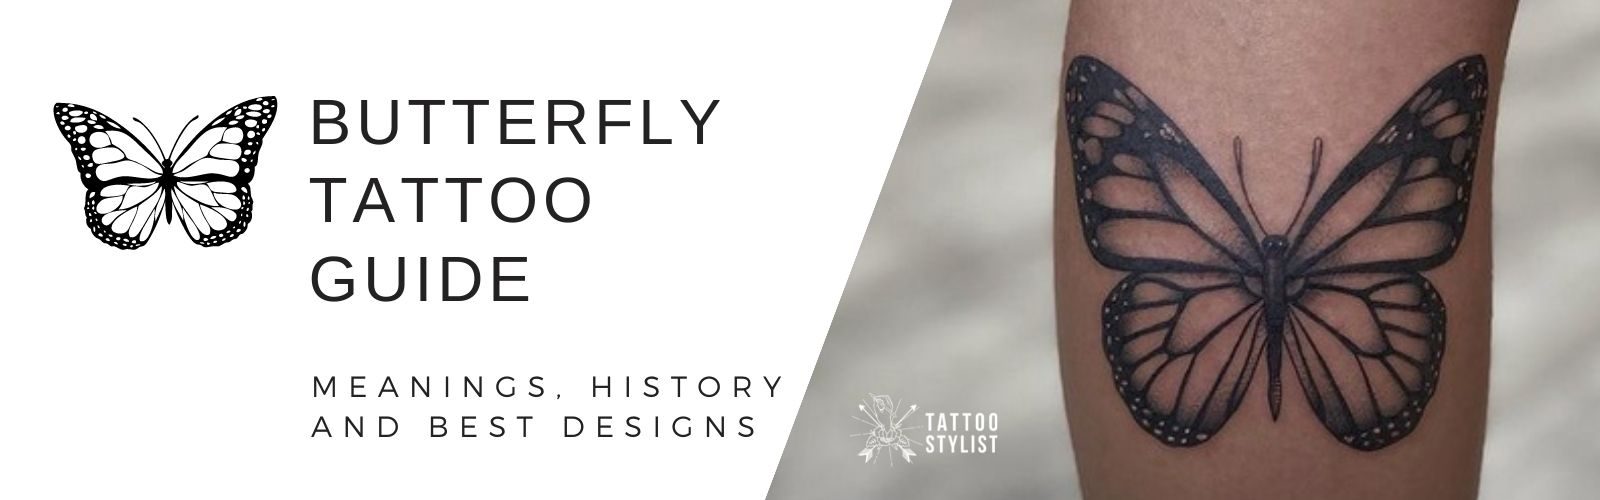 Butterfly Tattoo Designs and Meanings From Tattoo Design Professionals -  Tattoo Stylist